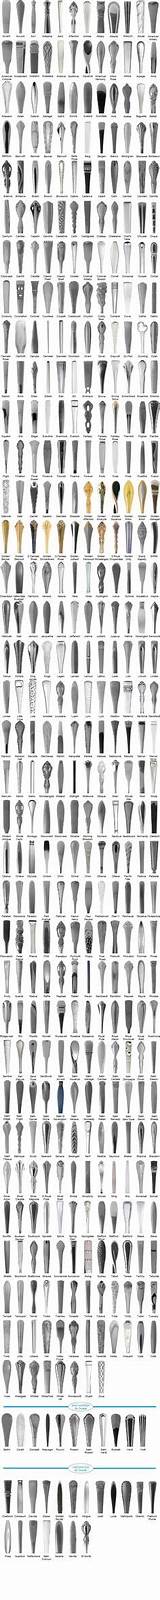 Oneida Stainless Flatware Patterns Discontinued Images